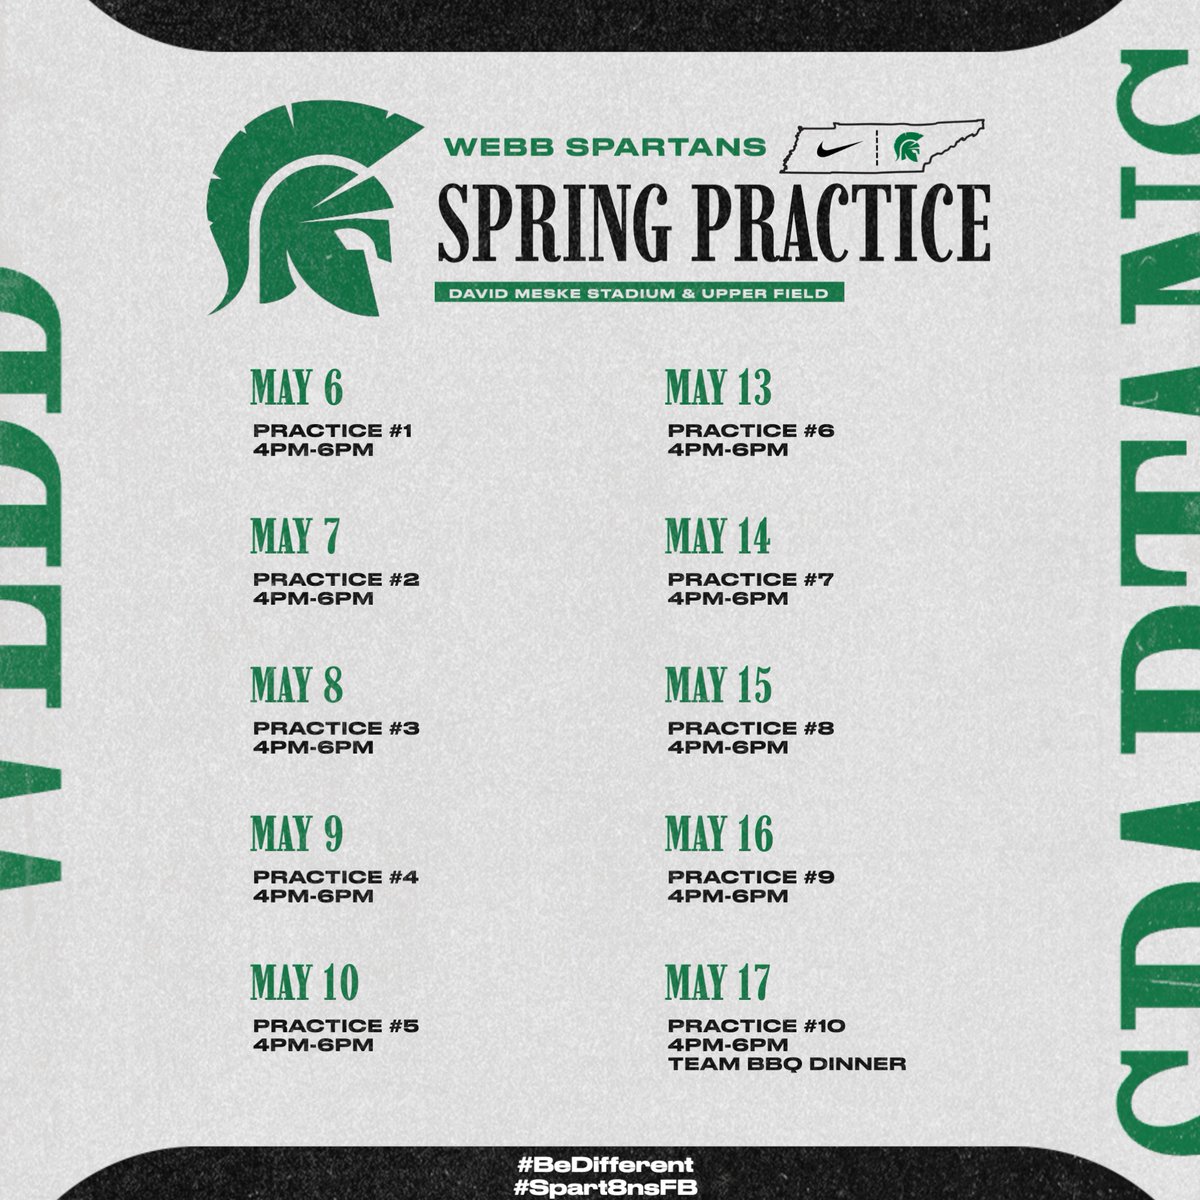 Spring Practice is almost here! All college coaches are welcome to come and watch our Spartans! #BeDifferent #Spart8nsFB